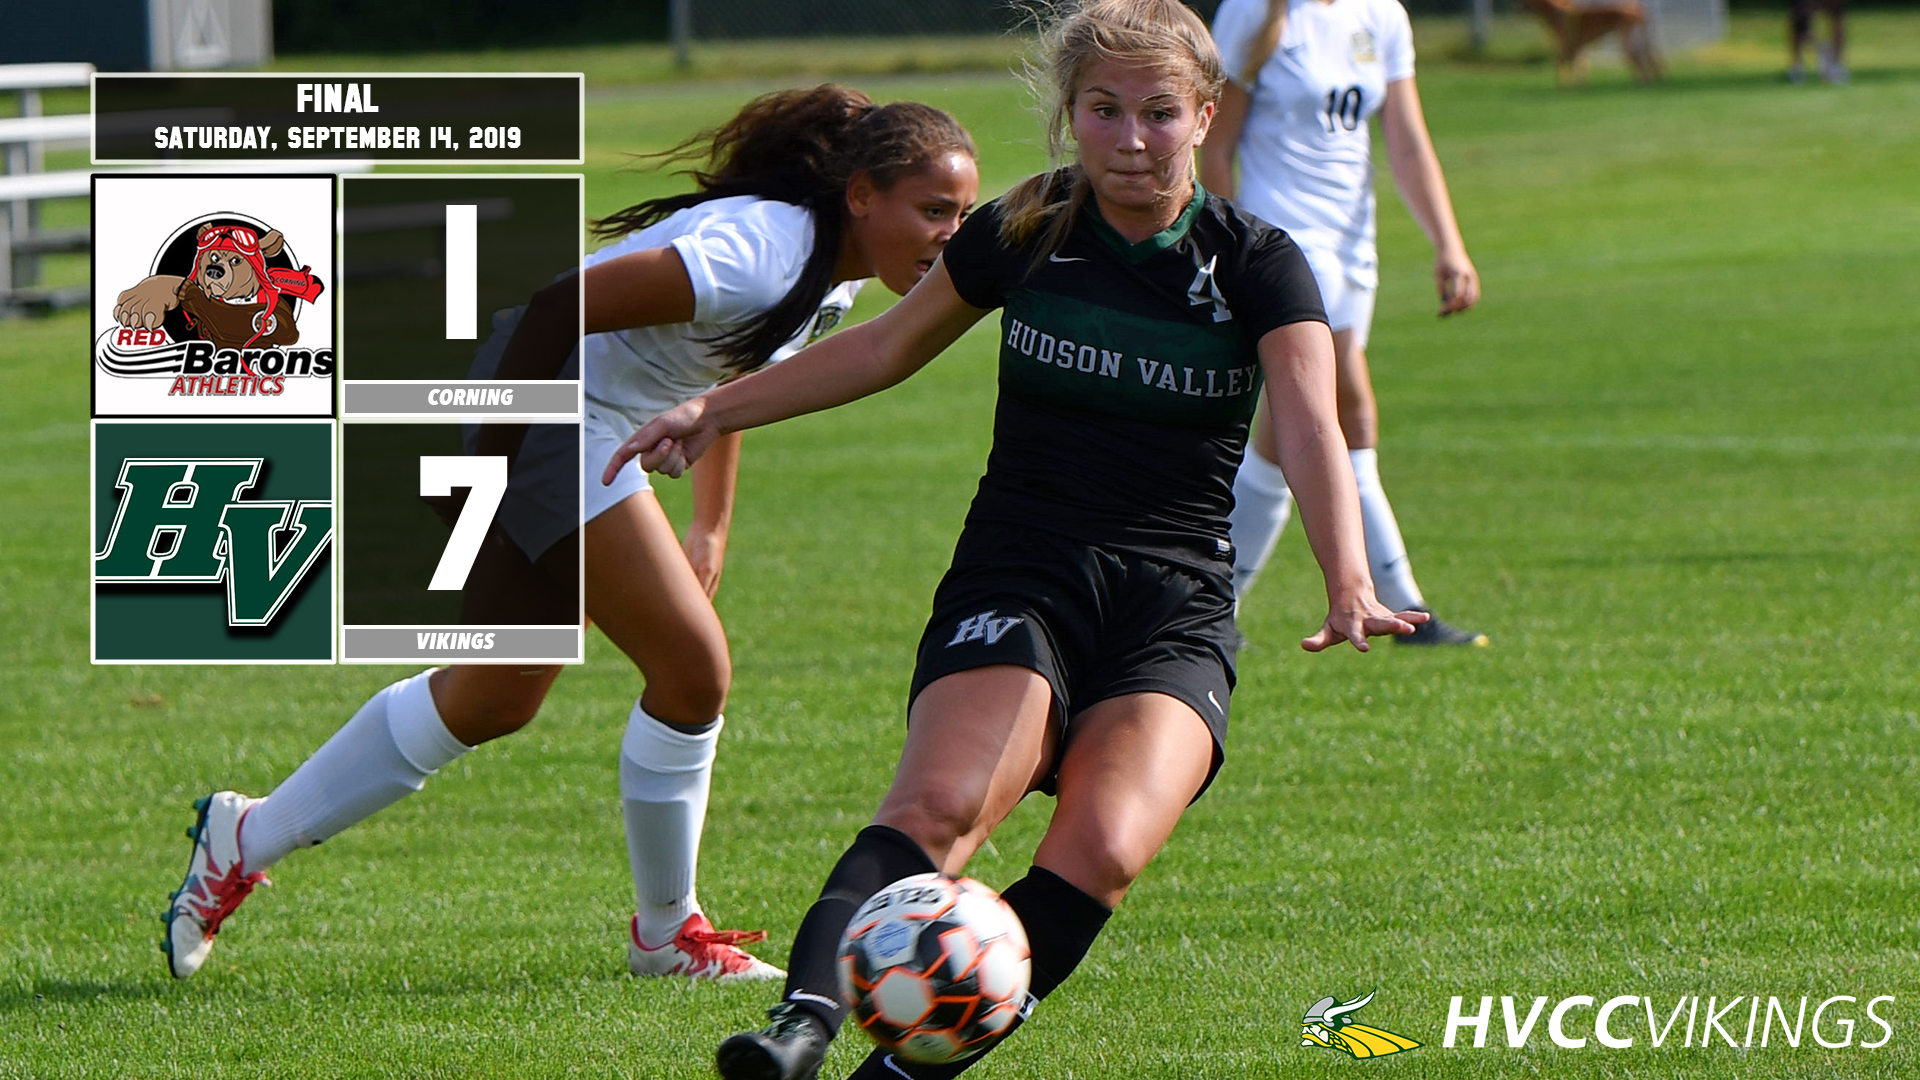 Women's soccer defeated Corning 7-1 on 9/14.